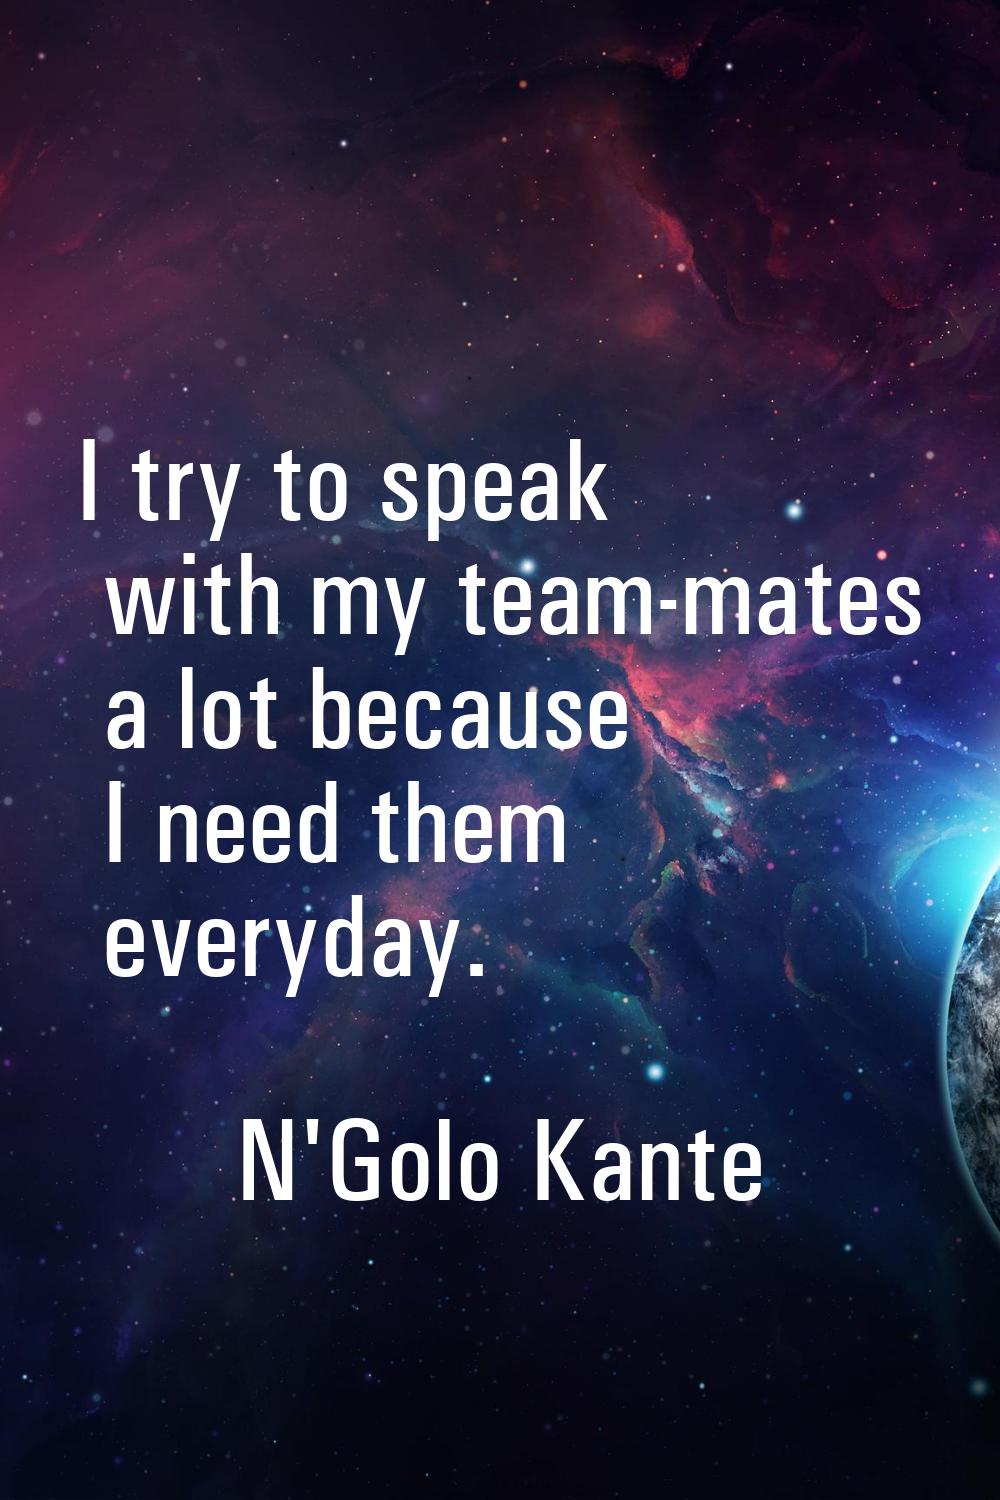 I try to speak with my team-mates a lot because I need them everyday.